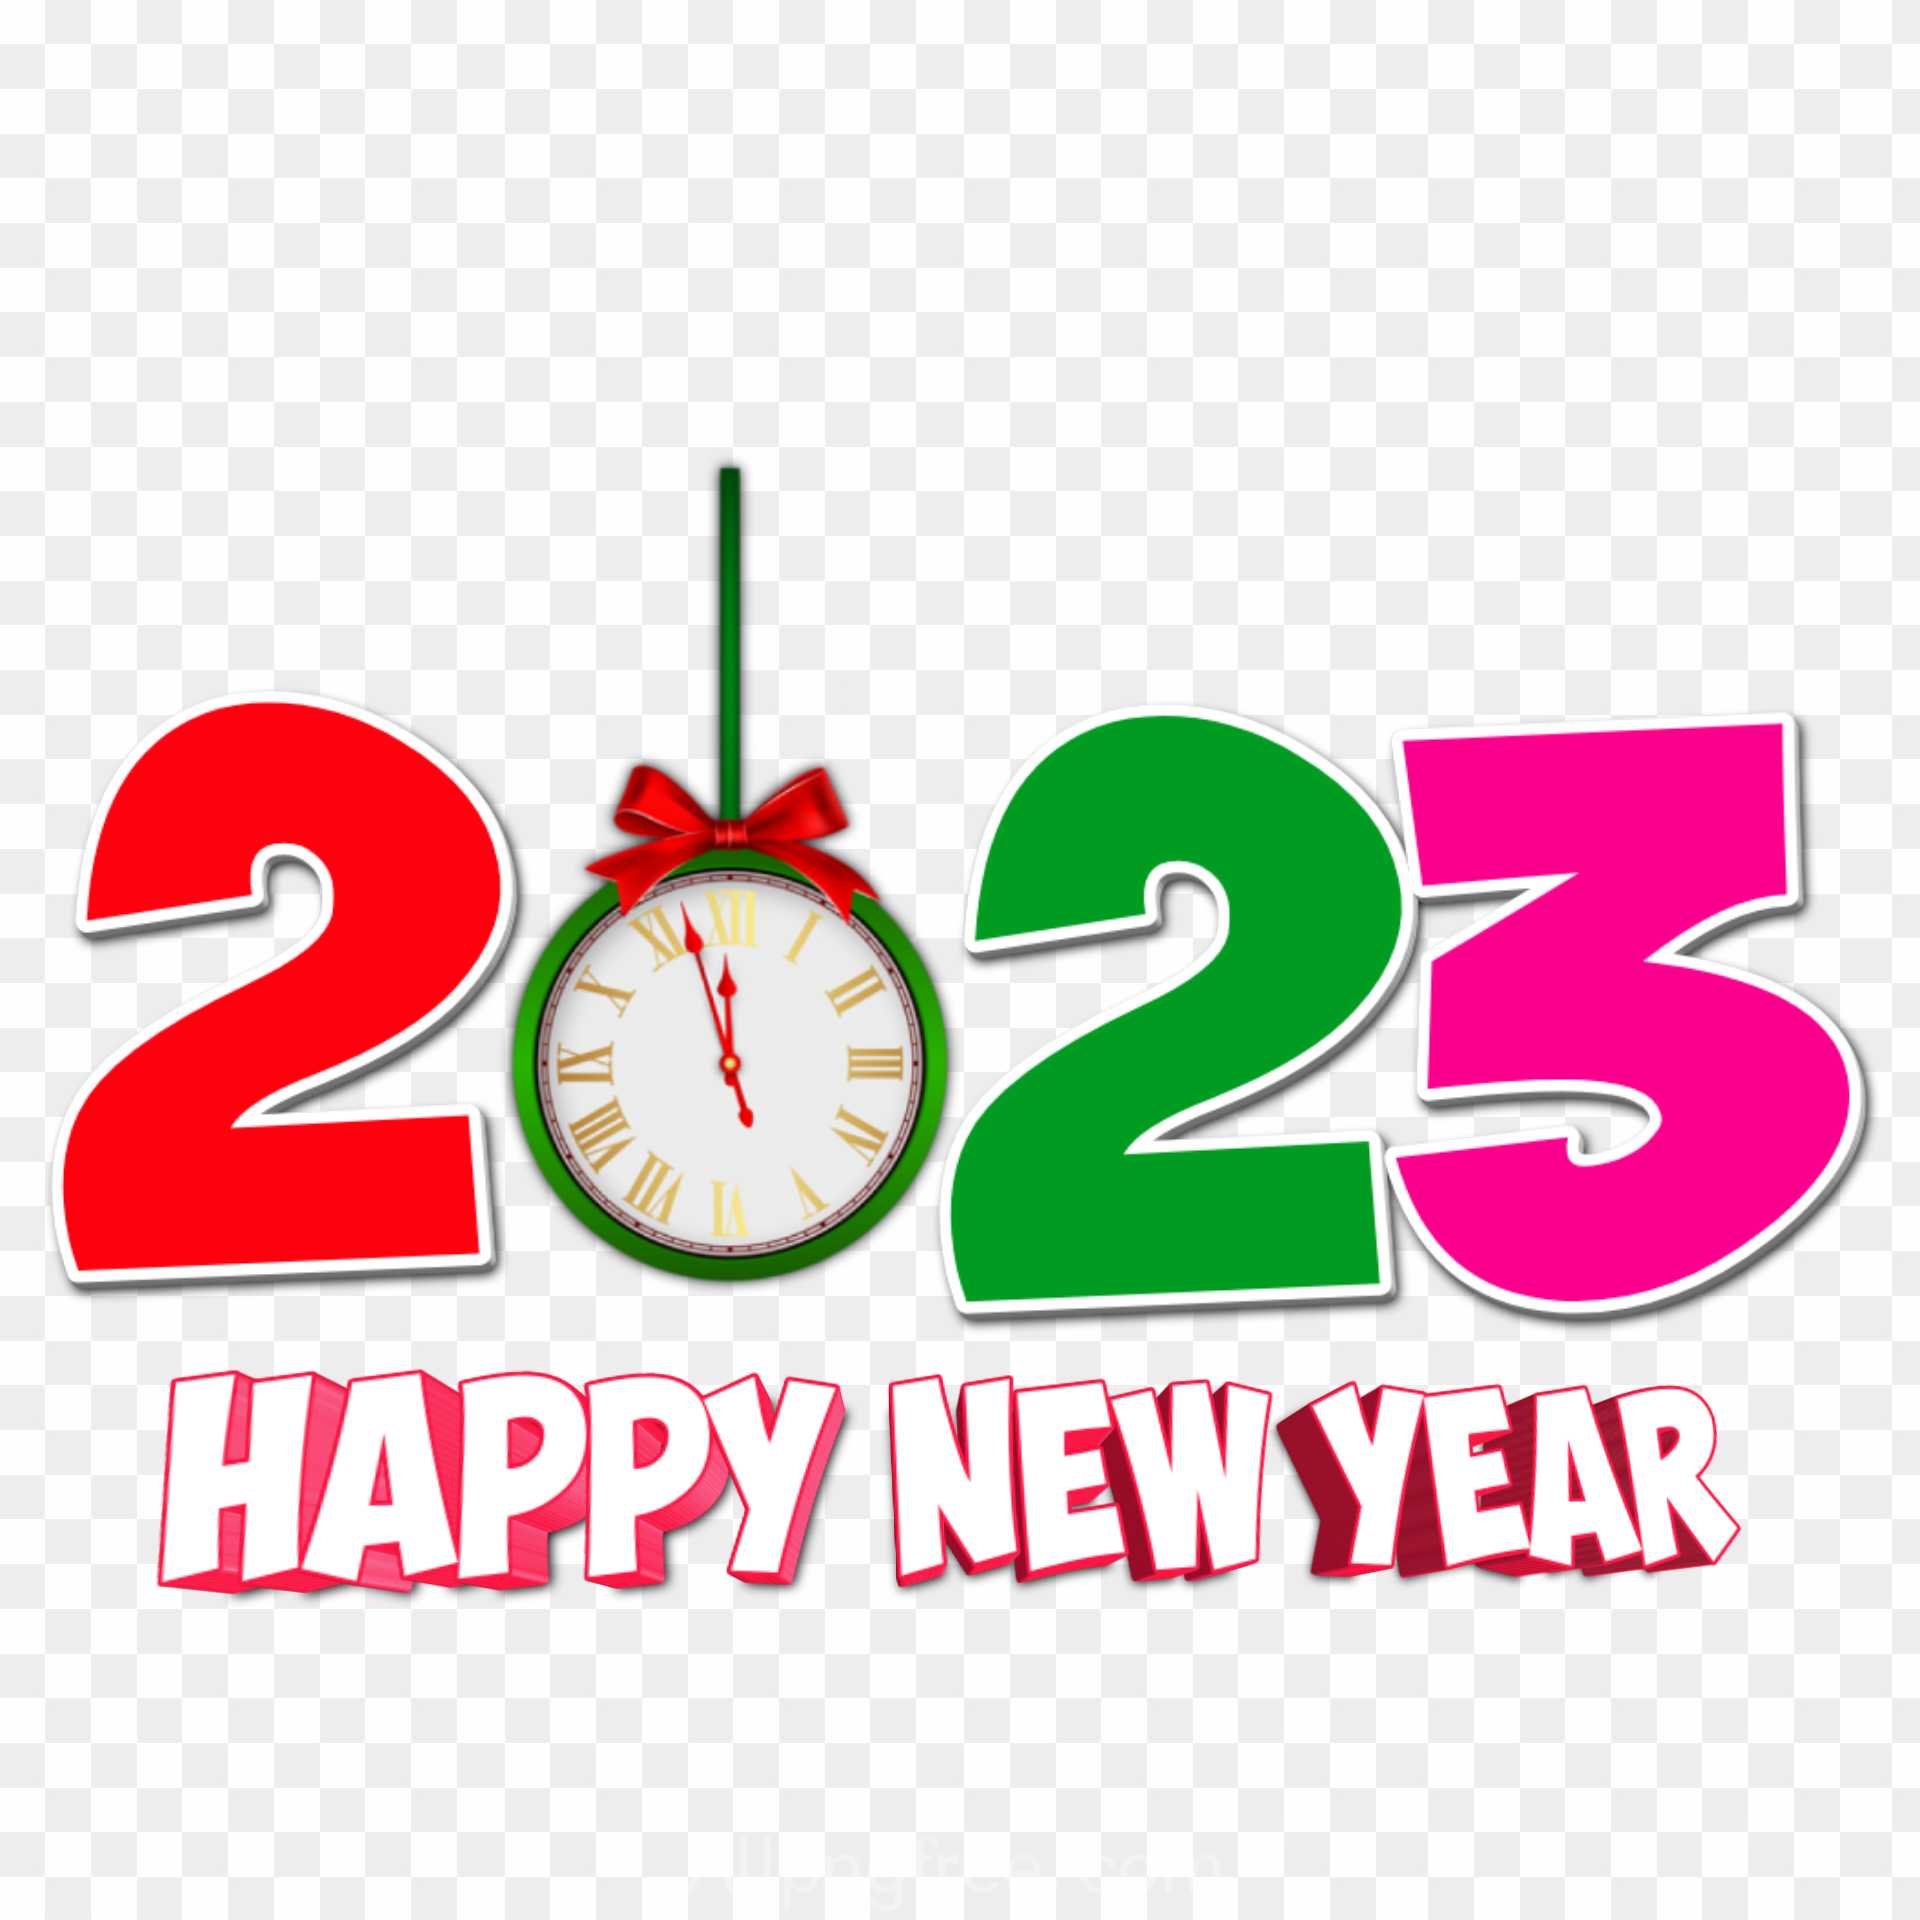 2023 happy new year png transparent images download 